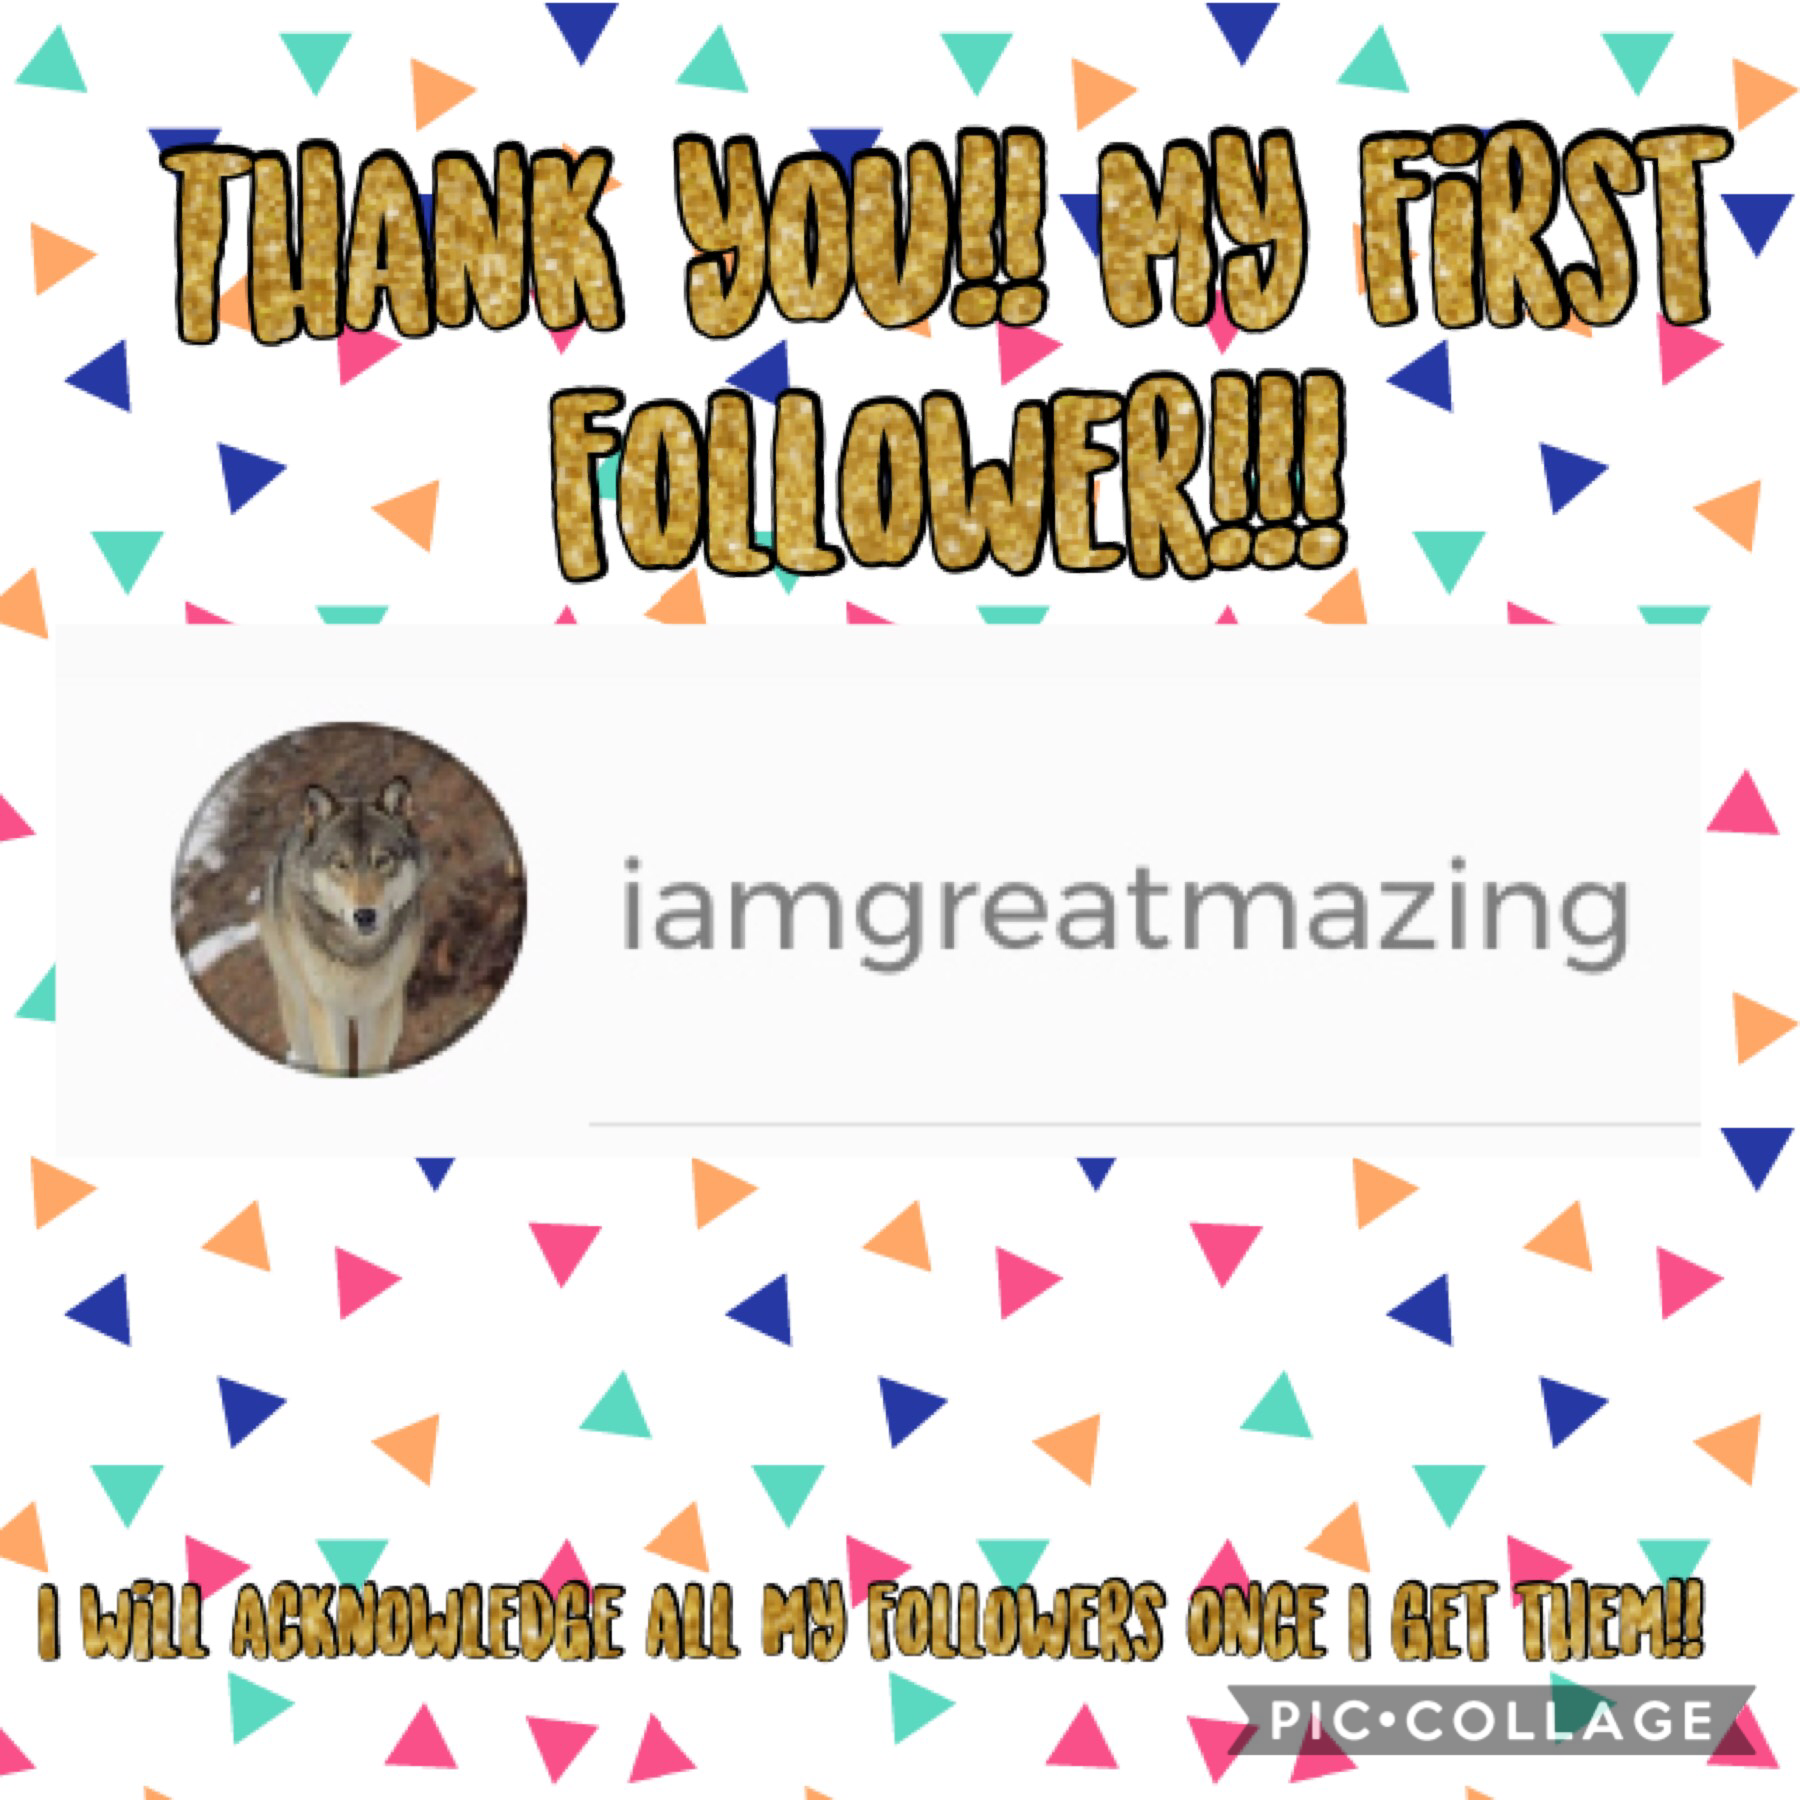 Thanks, I appreciate all my followers and each one I will thank 